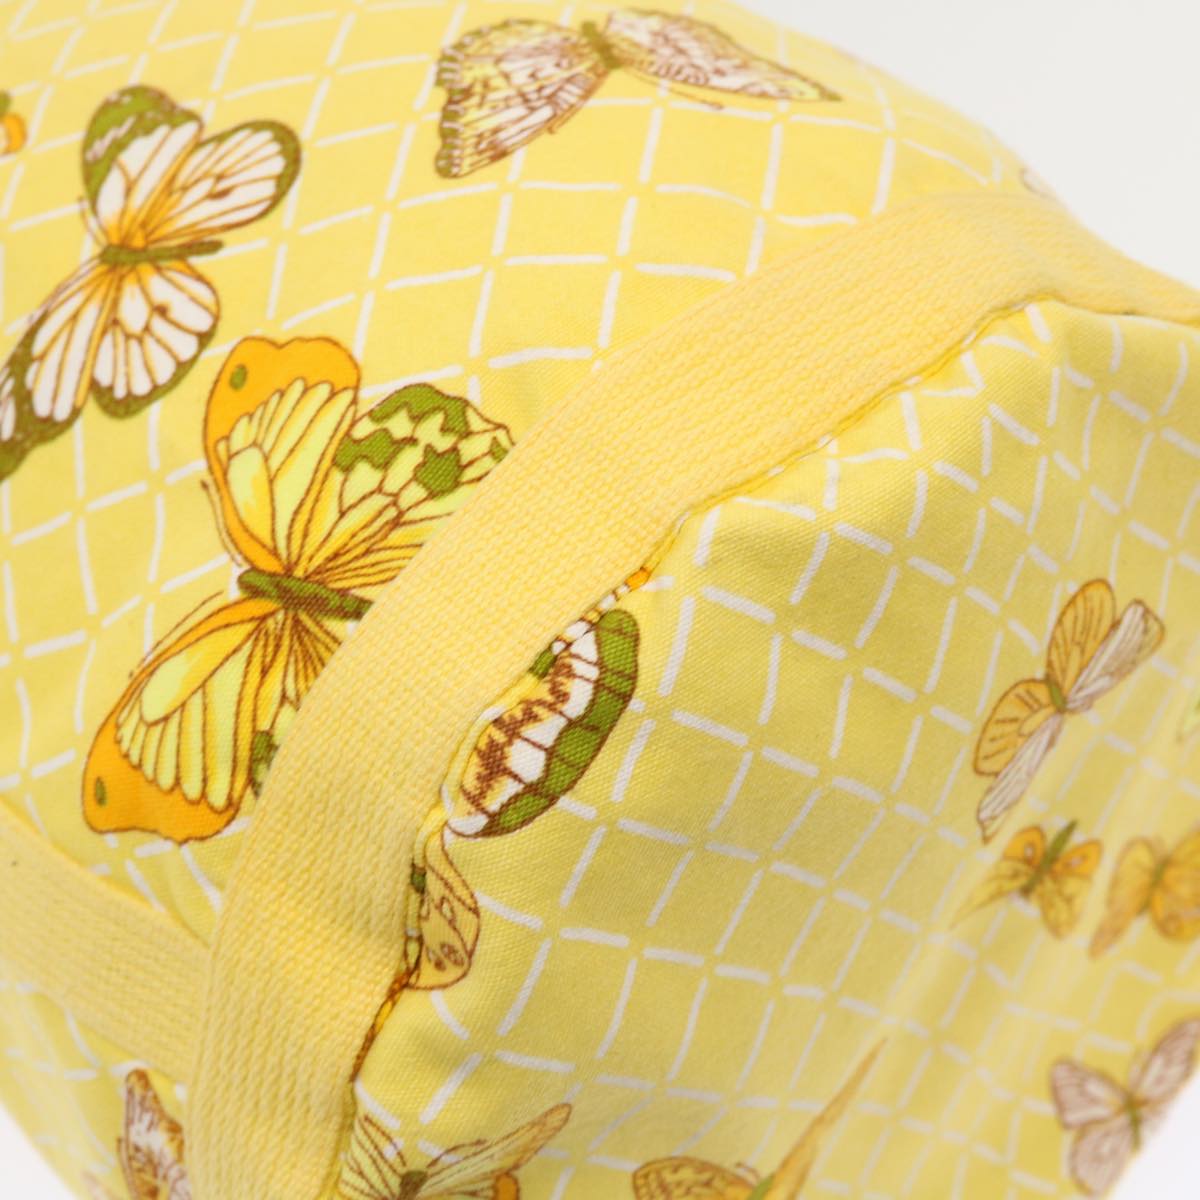 HERMES Butterfly Pattern Shoulder Bag Canvas Yellow Auth bs6404